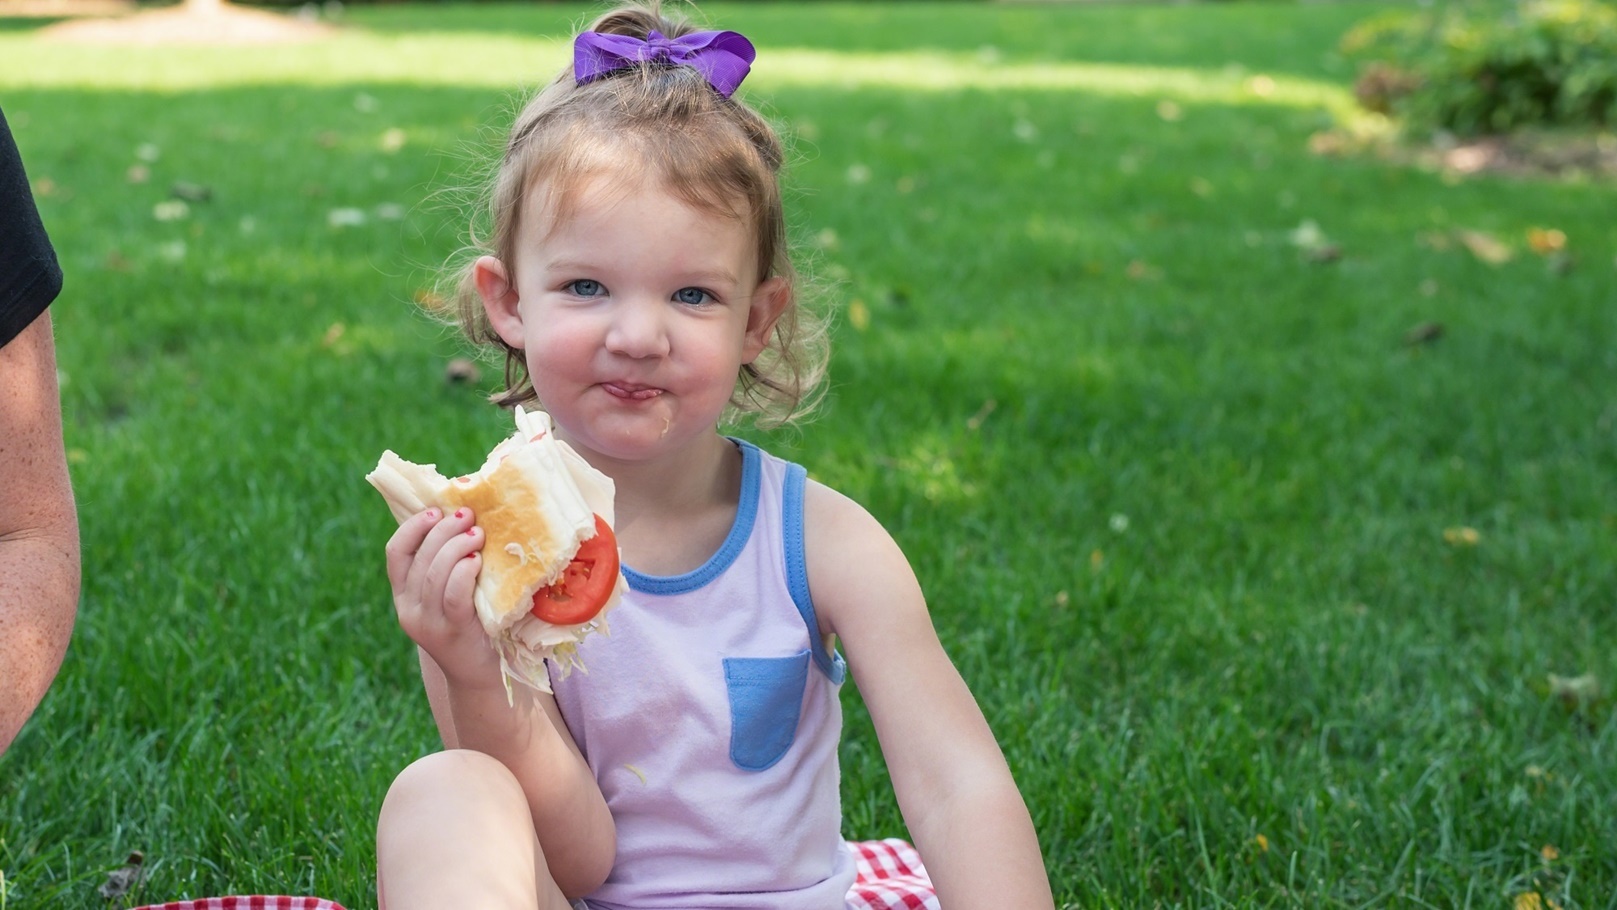 toddler-girl-eating-a-sandwich-on-a-picnic-at-the-2021-09-03-19-46-08-utc